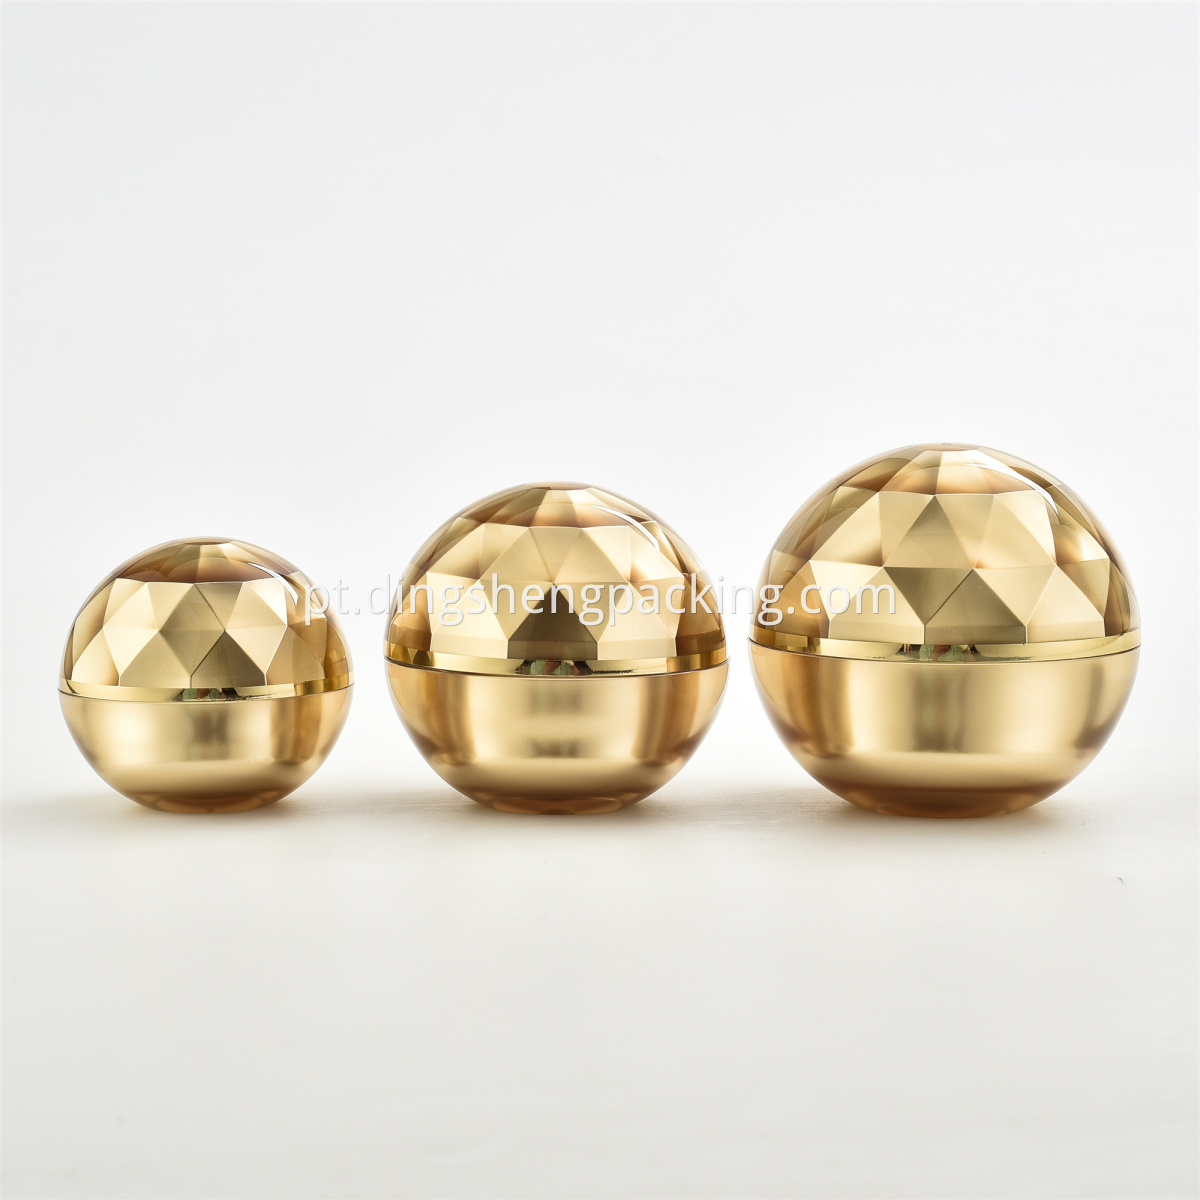 Ball Shaped Luxury Cosmetic Packaging